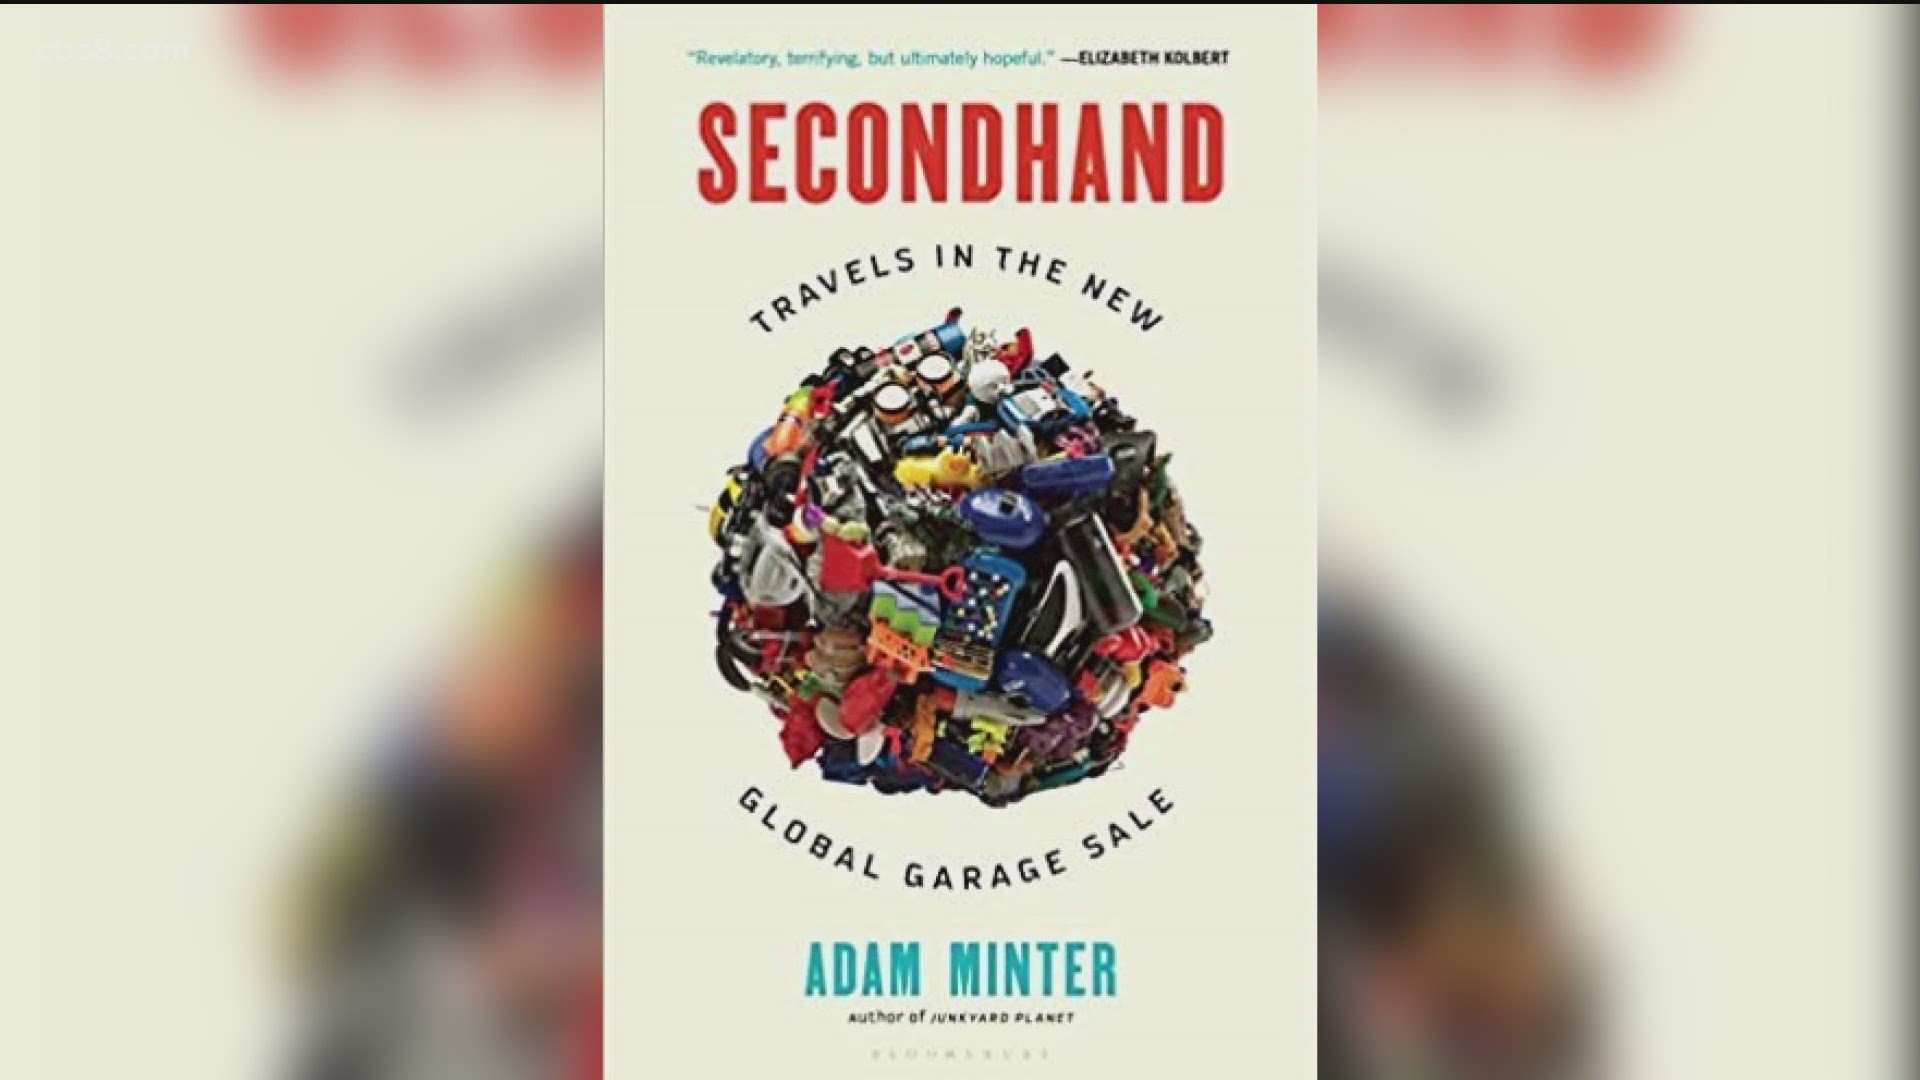 Author Adam Minter joined Morning Extra to talk about what he found out about thrift stores and donations during his research.